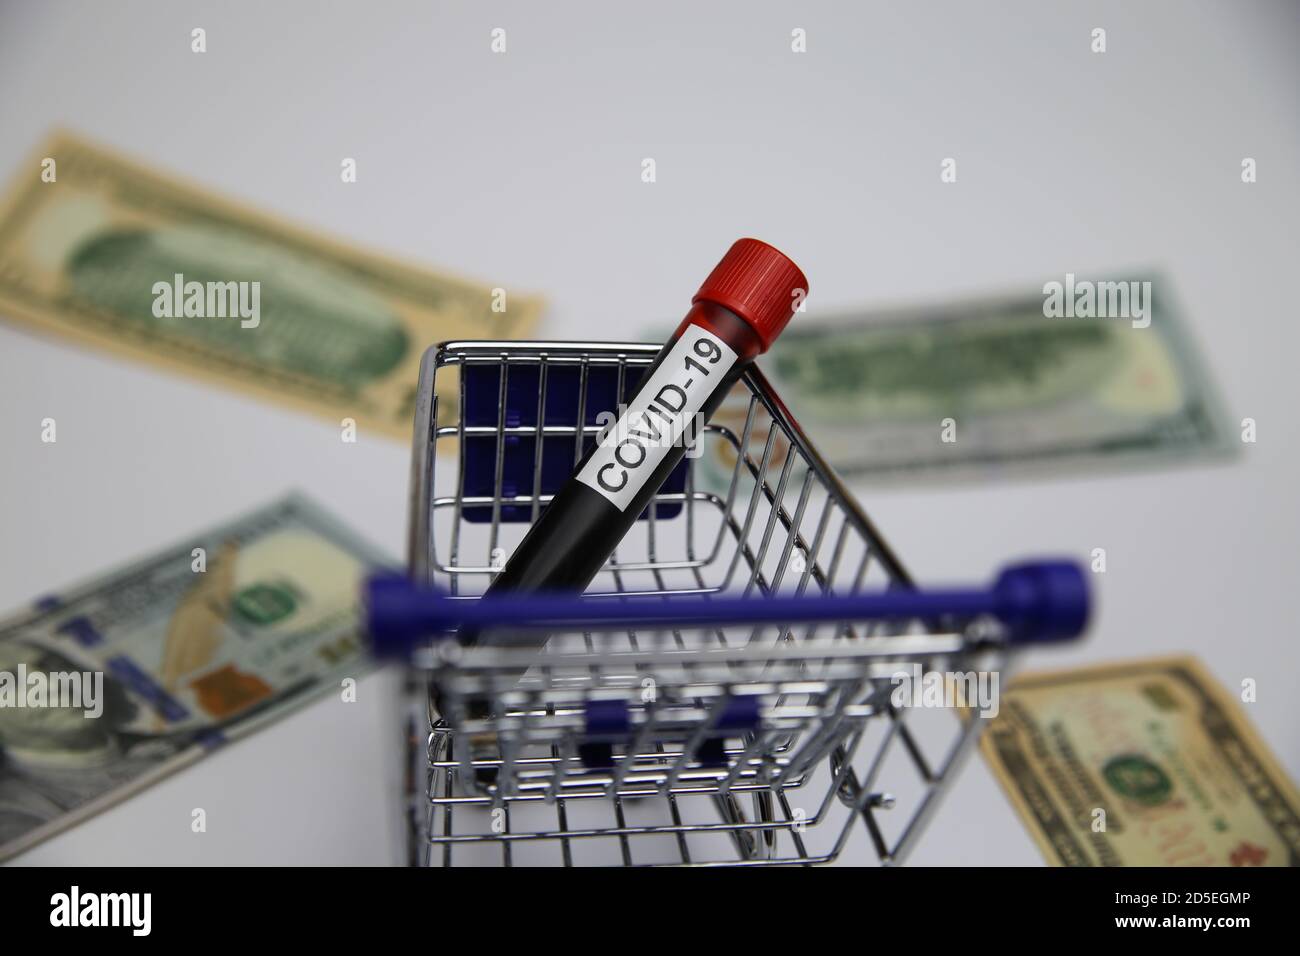 View on modell of shopping cart with covid-19 blood sample tube and us dollar bills background  -consumer behaviour and retail  trade during corona cr Stock Photo